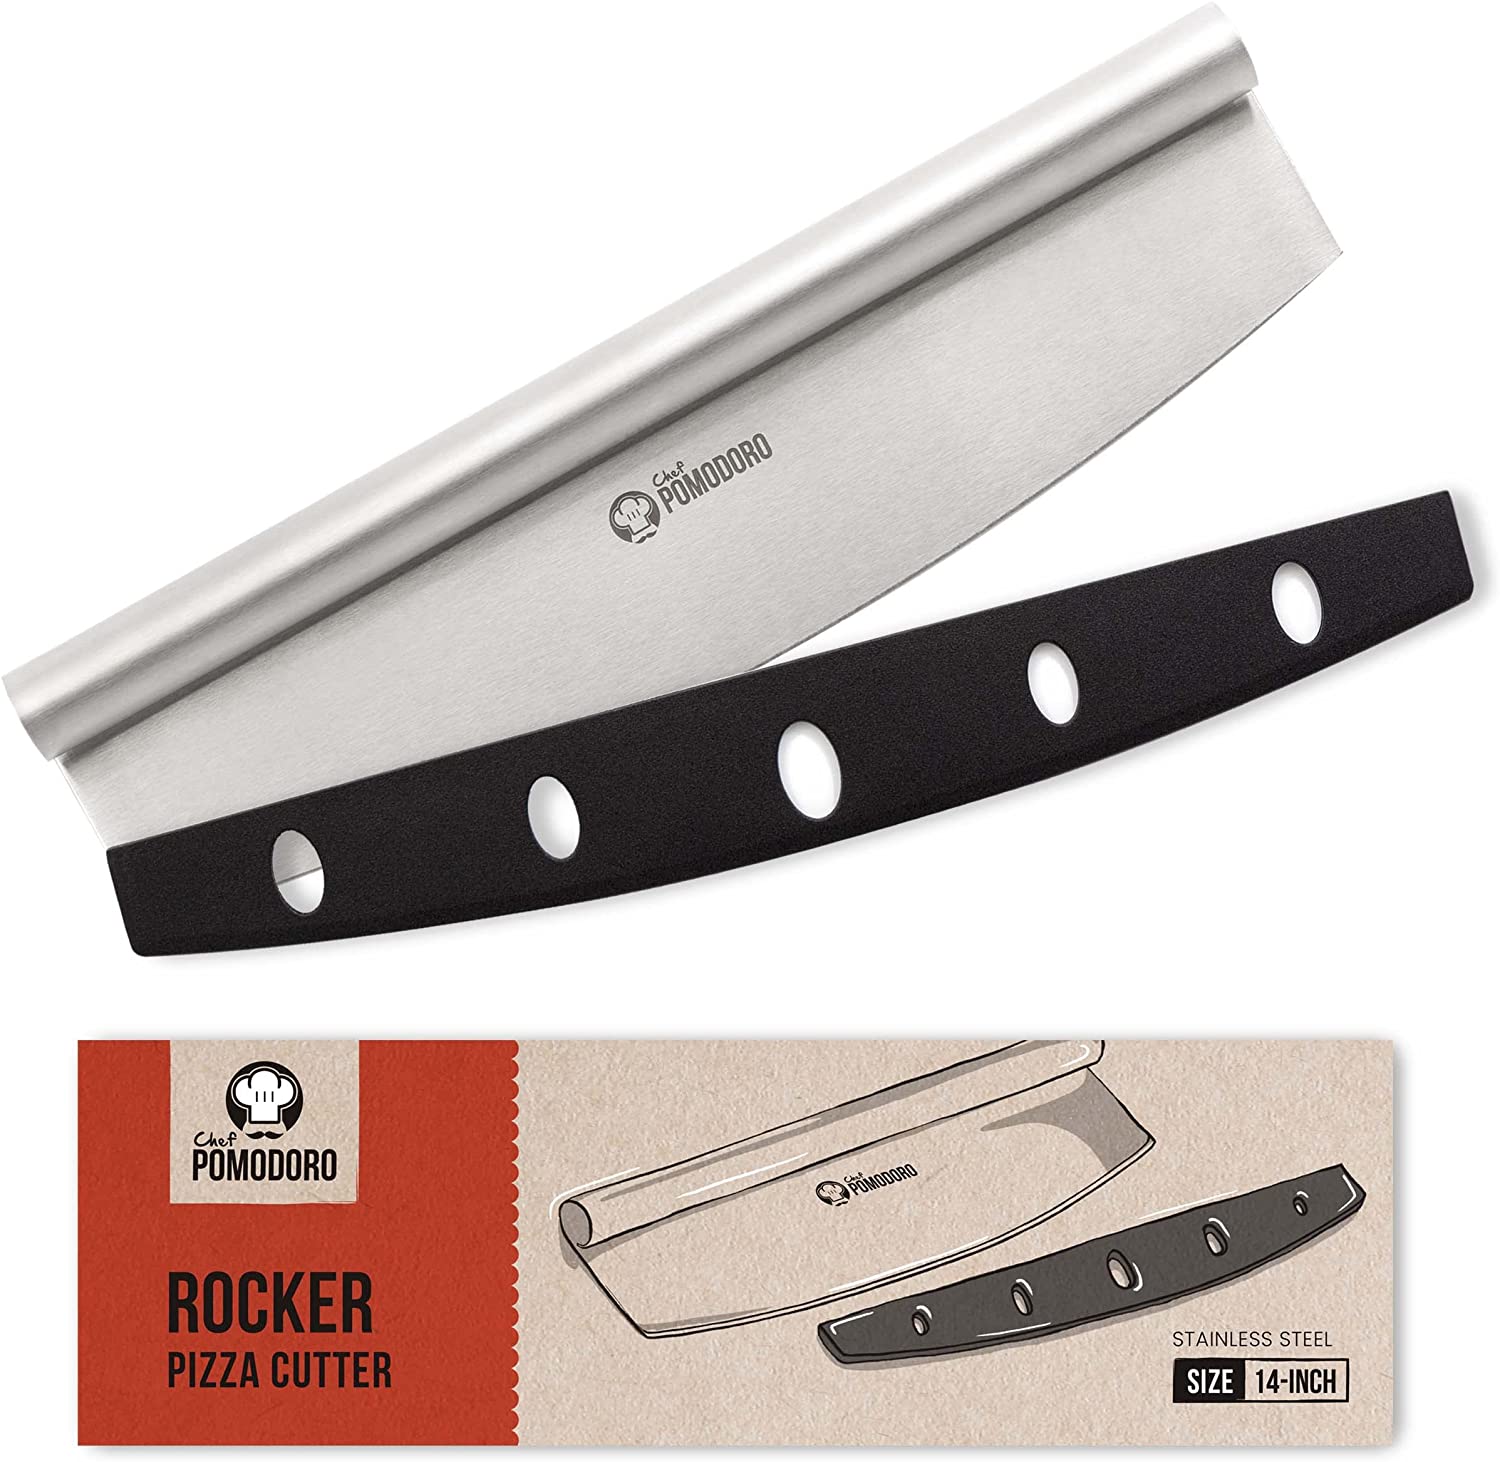 Chef Pomodoro stainless Steel Pizza Cutter Rocker Knife 